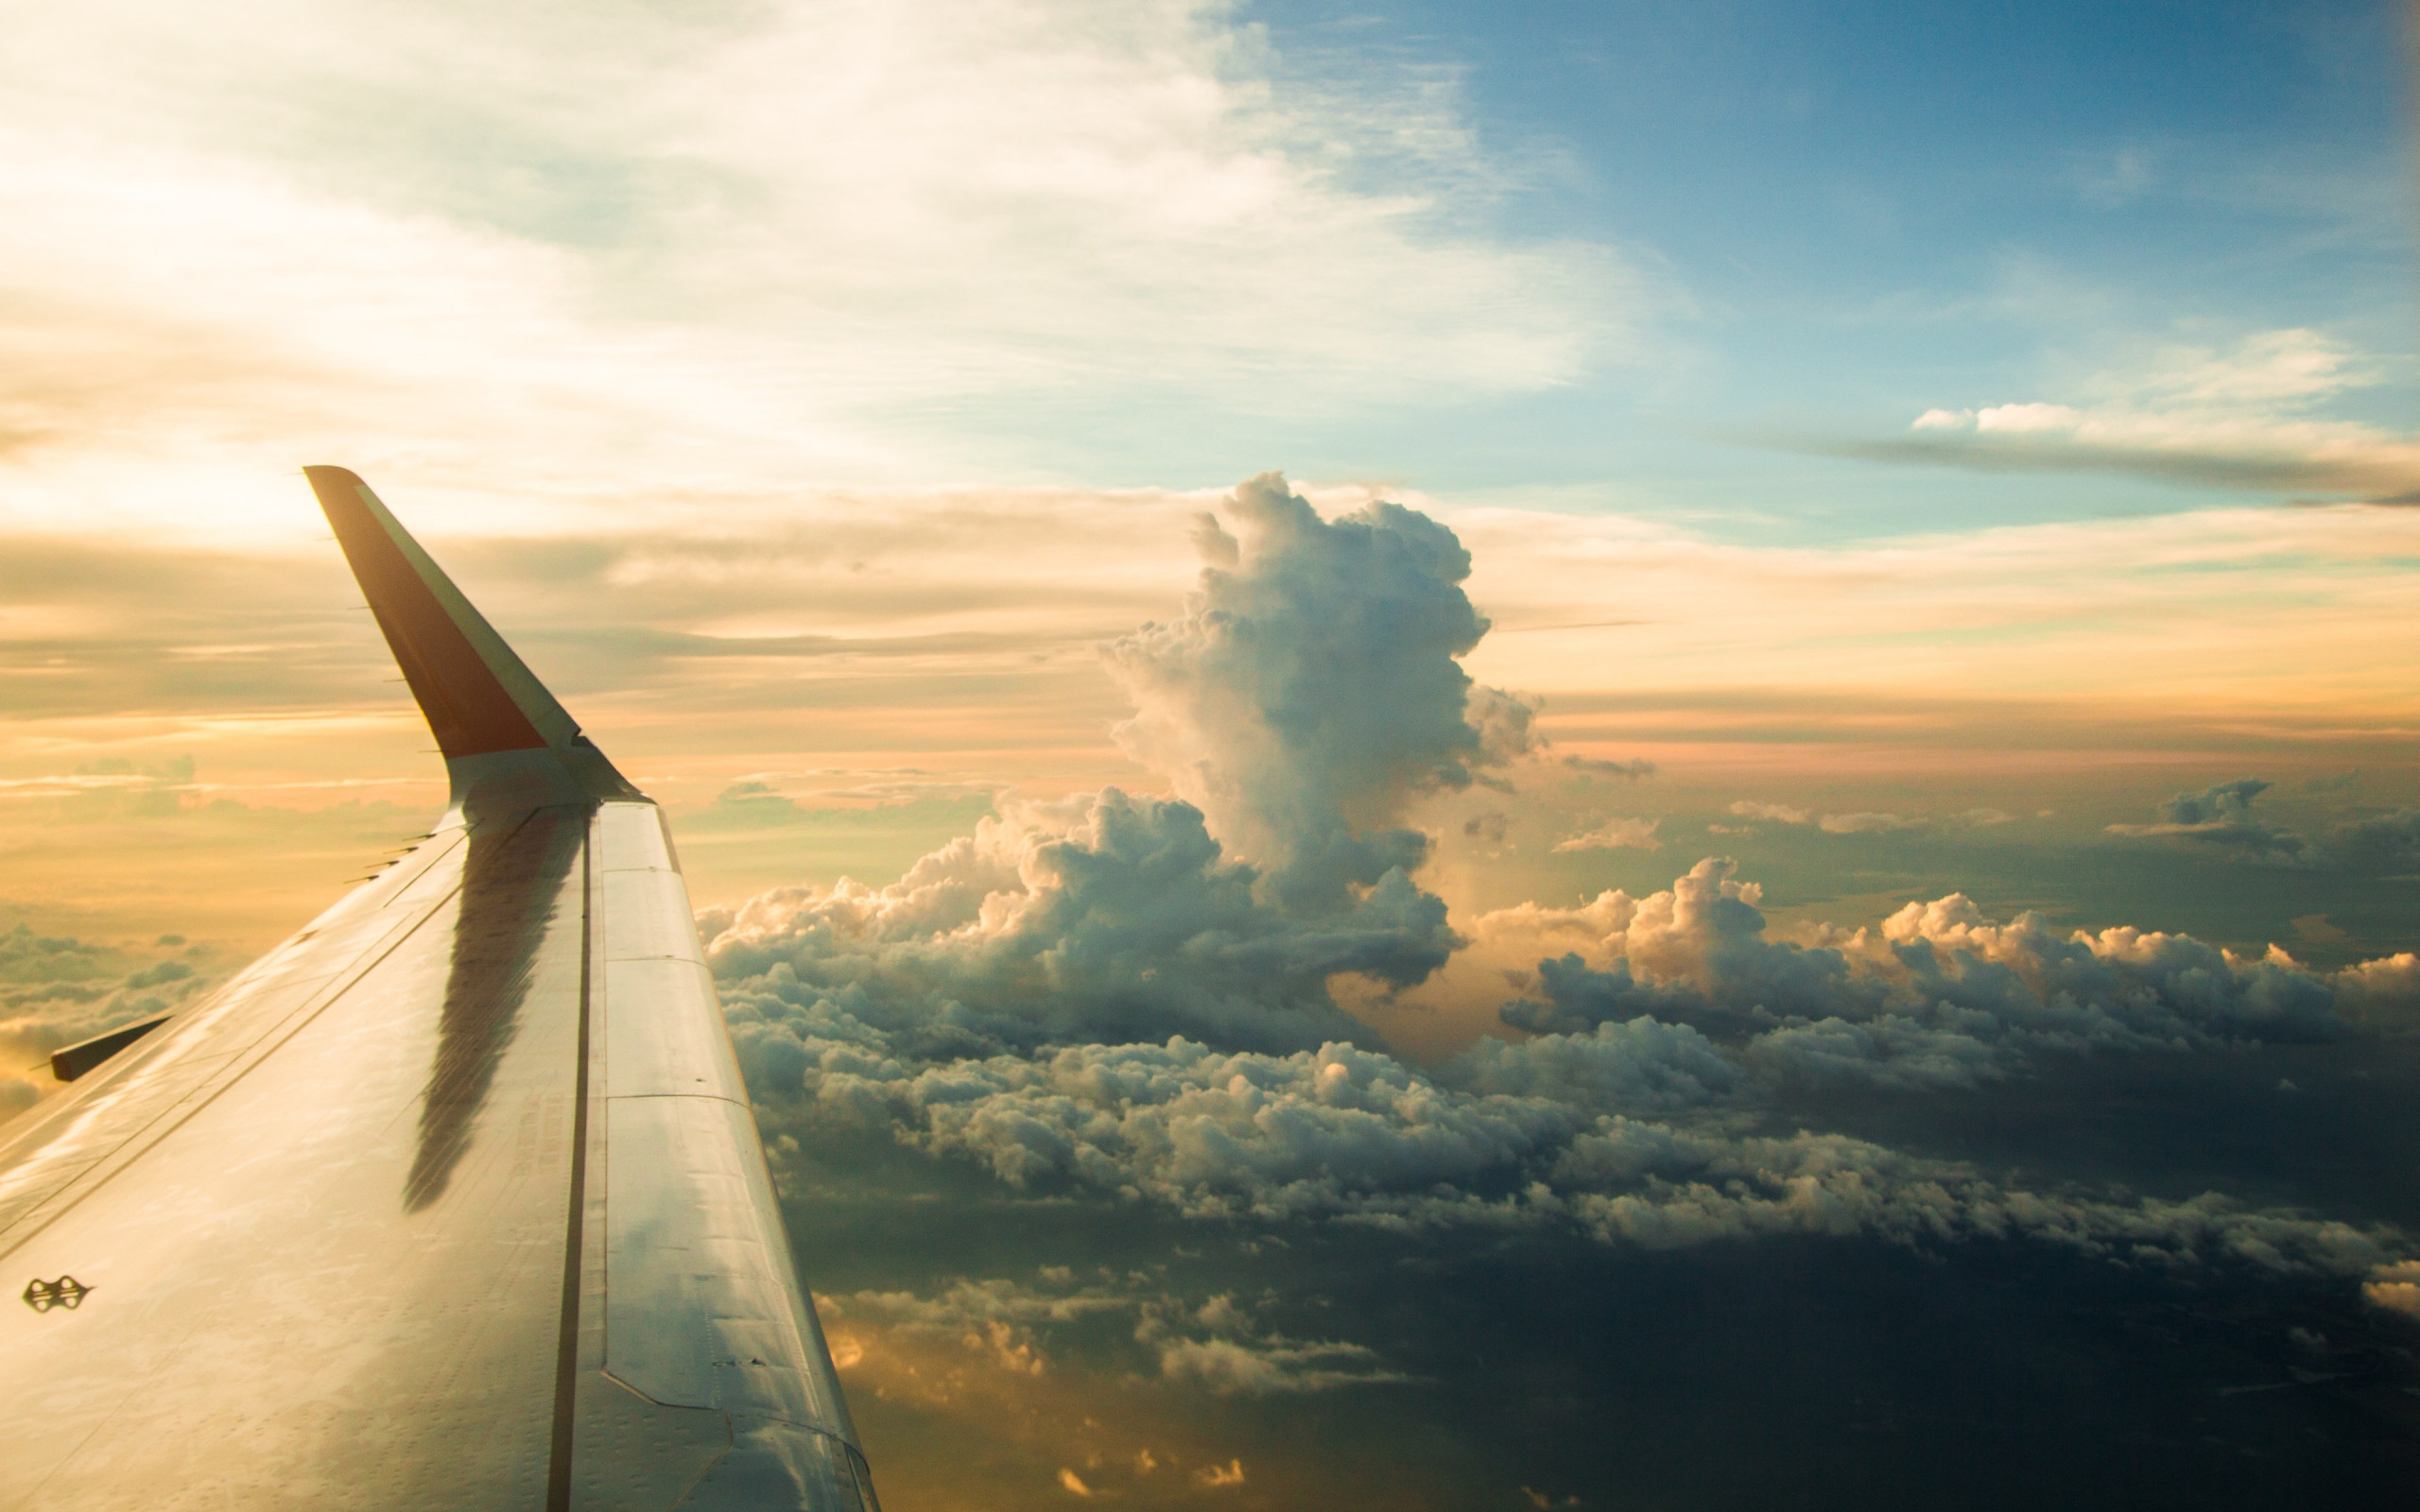 Download wallpaper: View from the airplane window 2560x1600